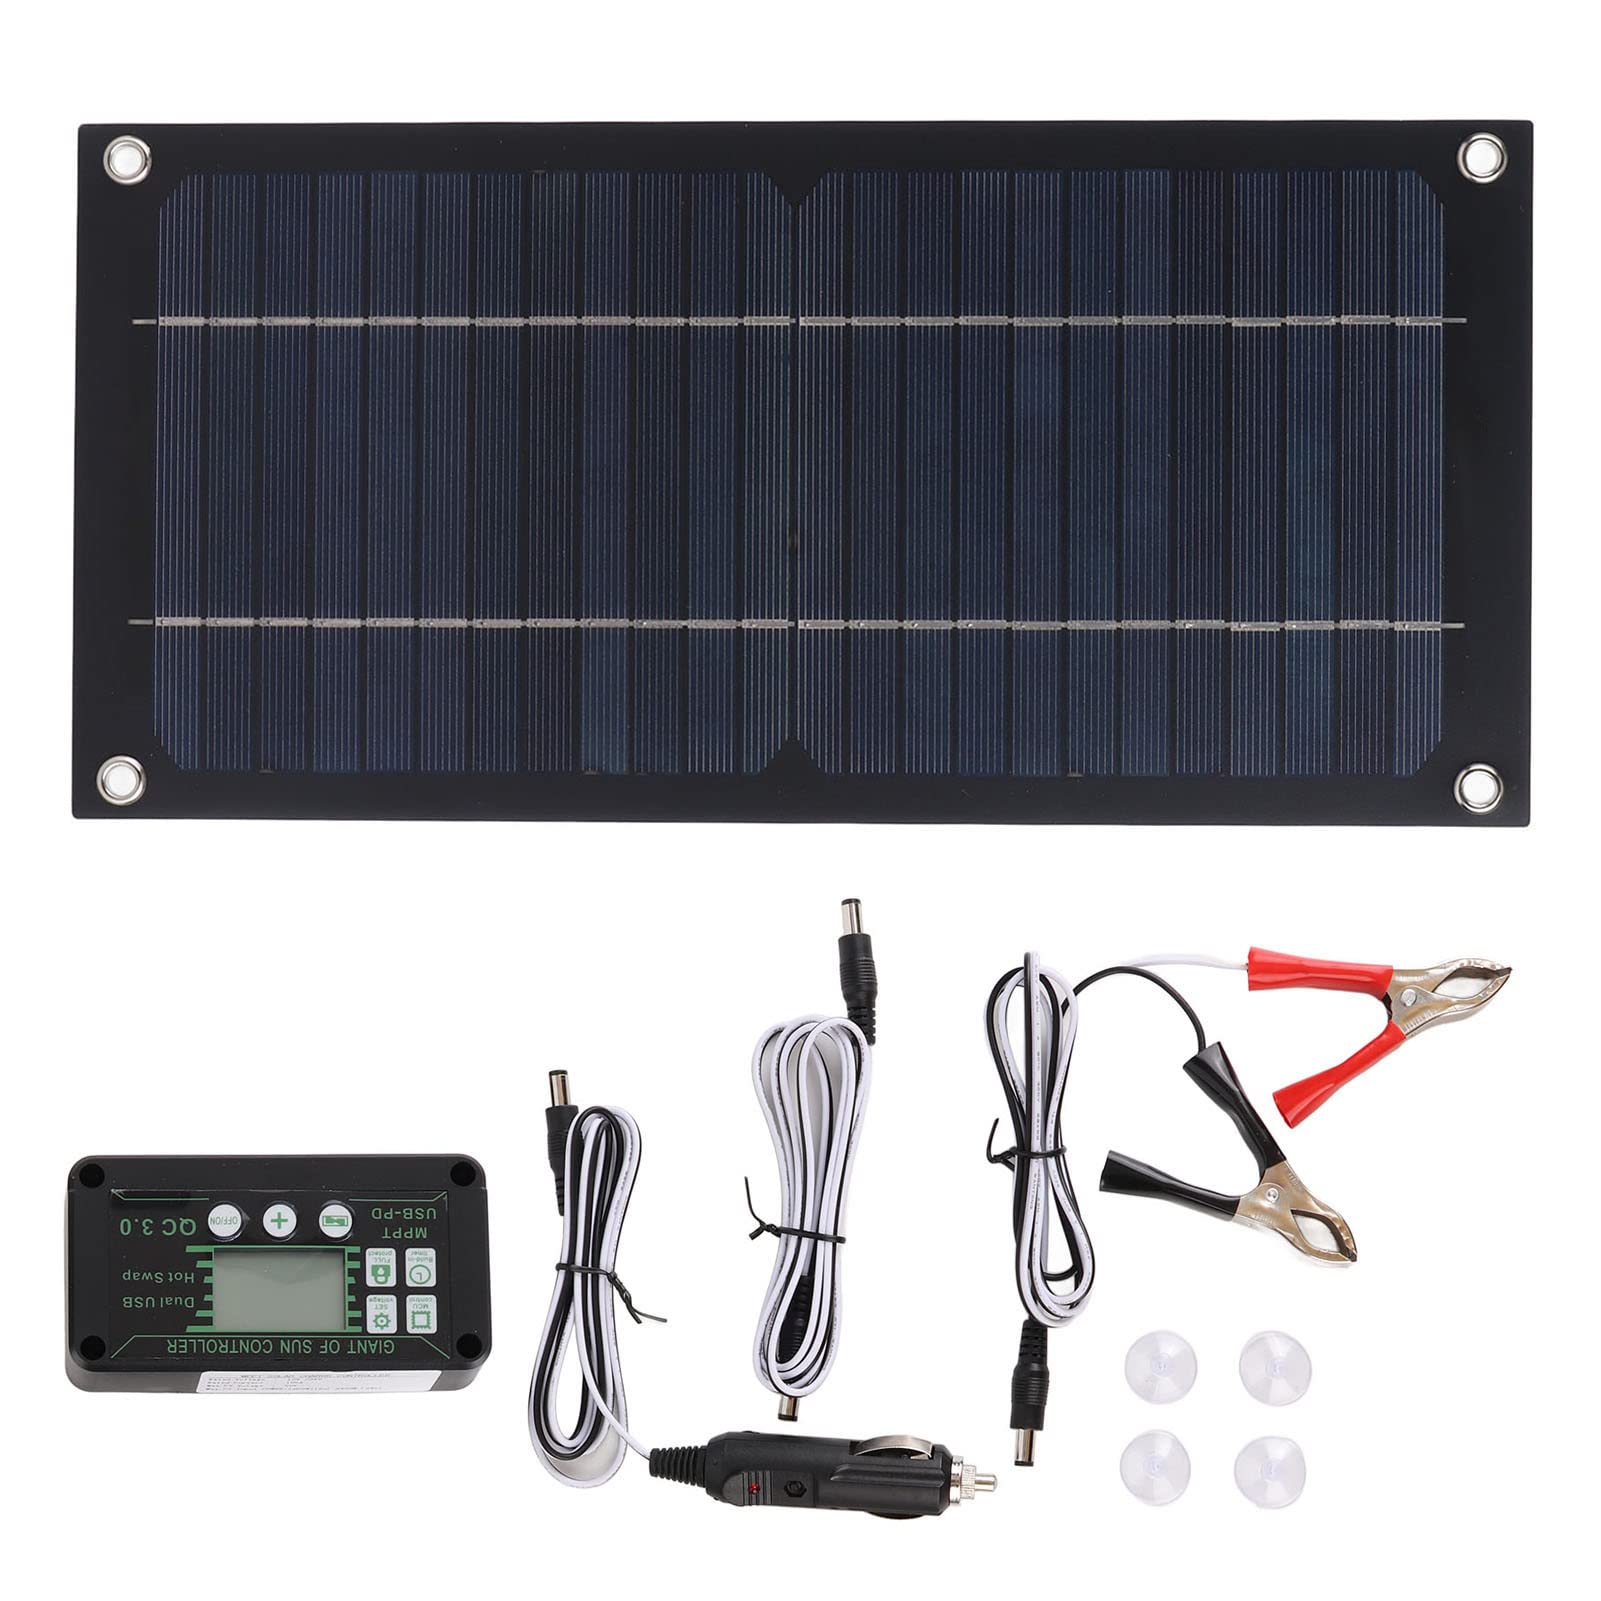 600W Solar Panel Charger, 12-24V 100A Portable Solar Panel Kit, Monocrystalline Solar Charge Controller Kit, Solar Panel Charger for Automobile Battery, Automobile, RV